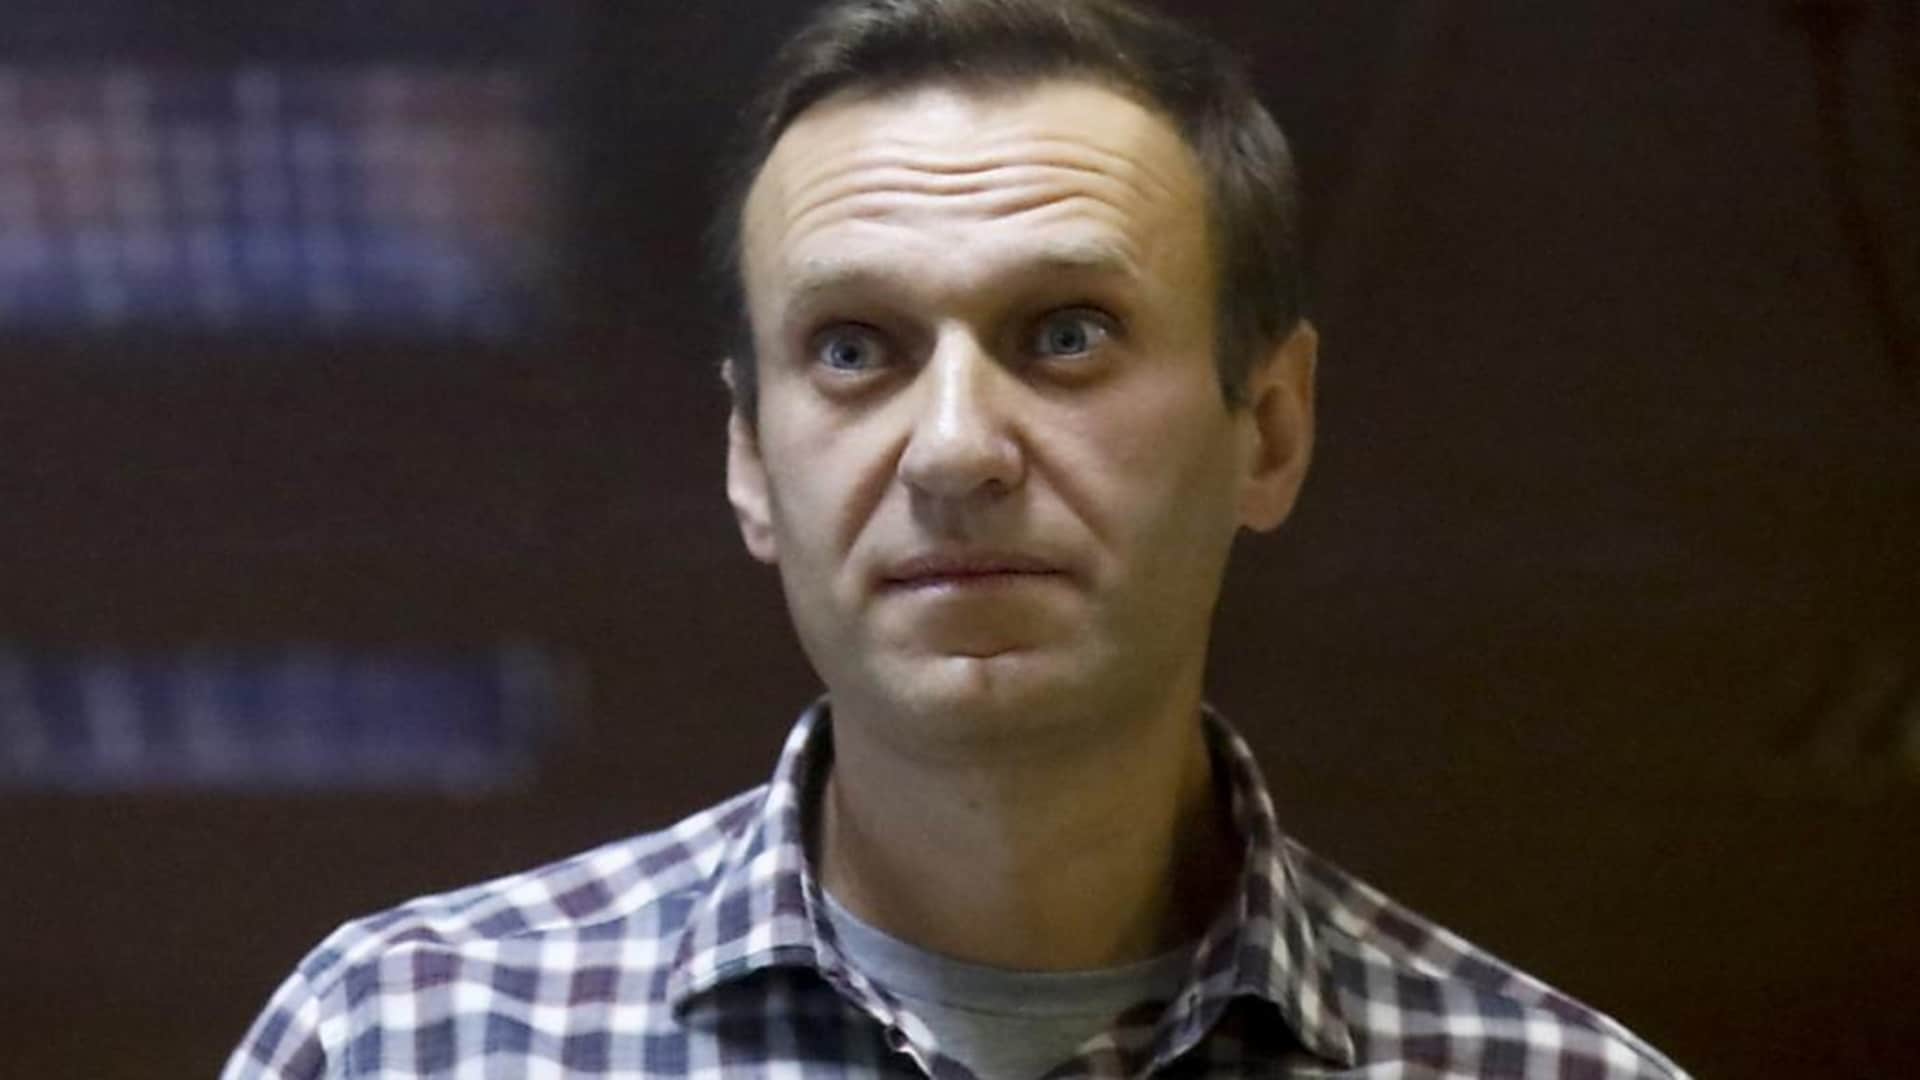 The Federal Defense Administration demands the release of Alexei Navalny